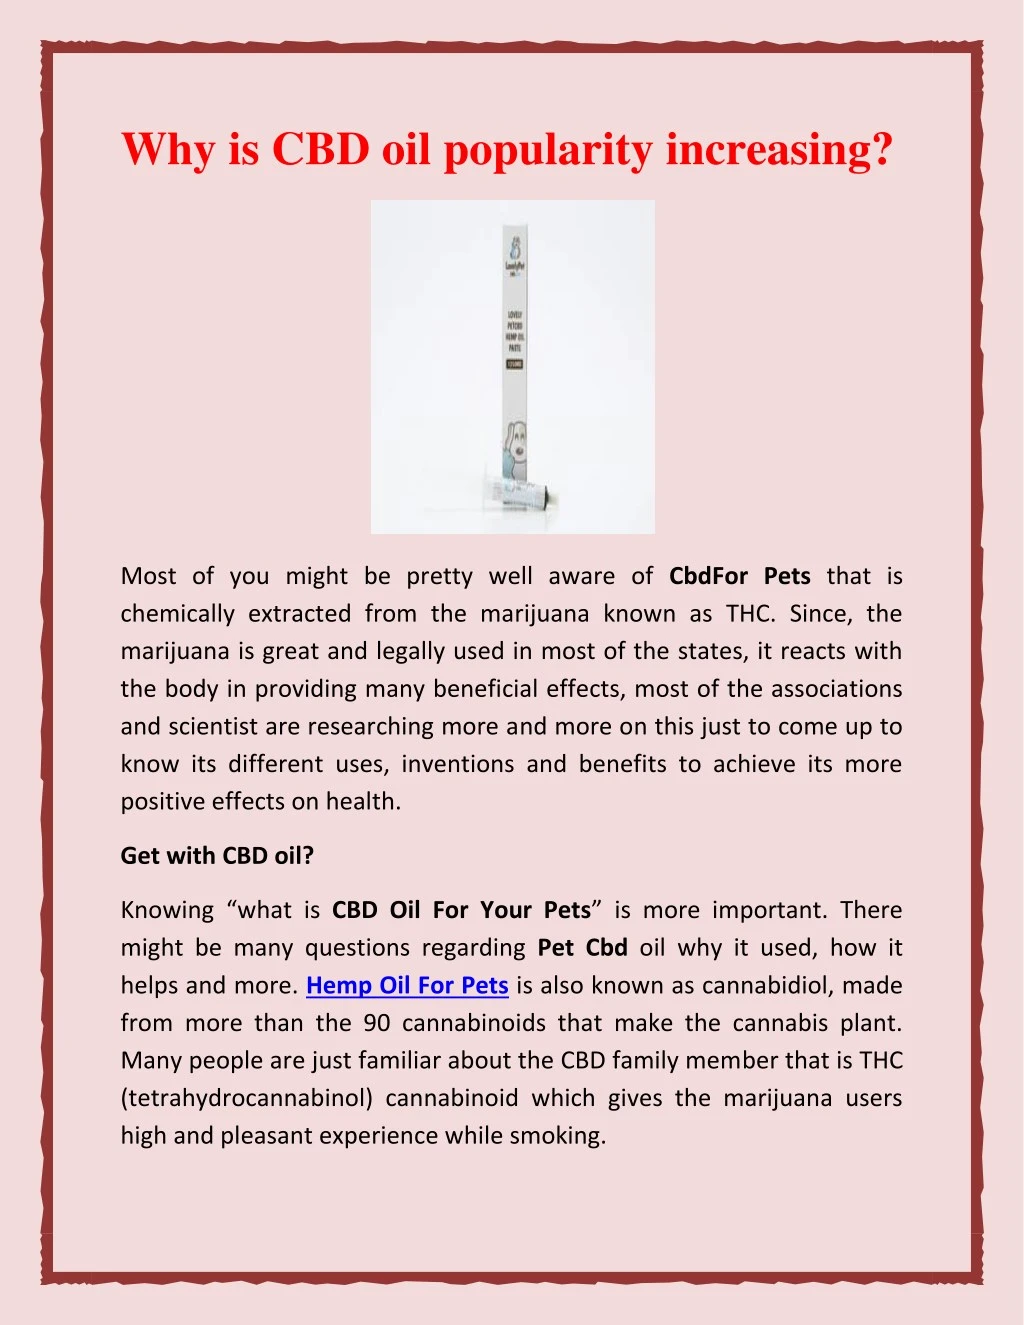 why is cbd oil popularity increasing